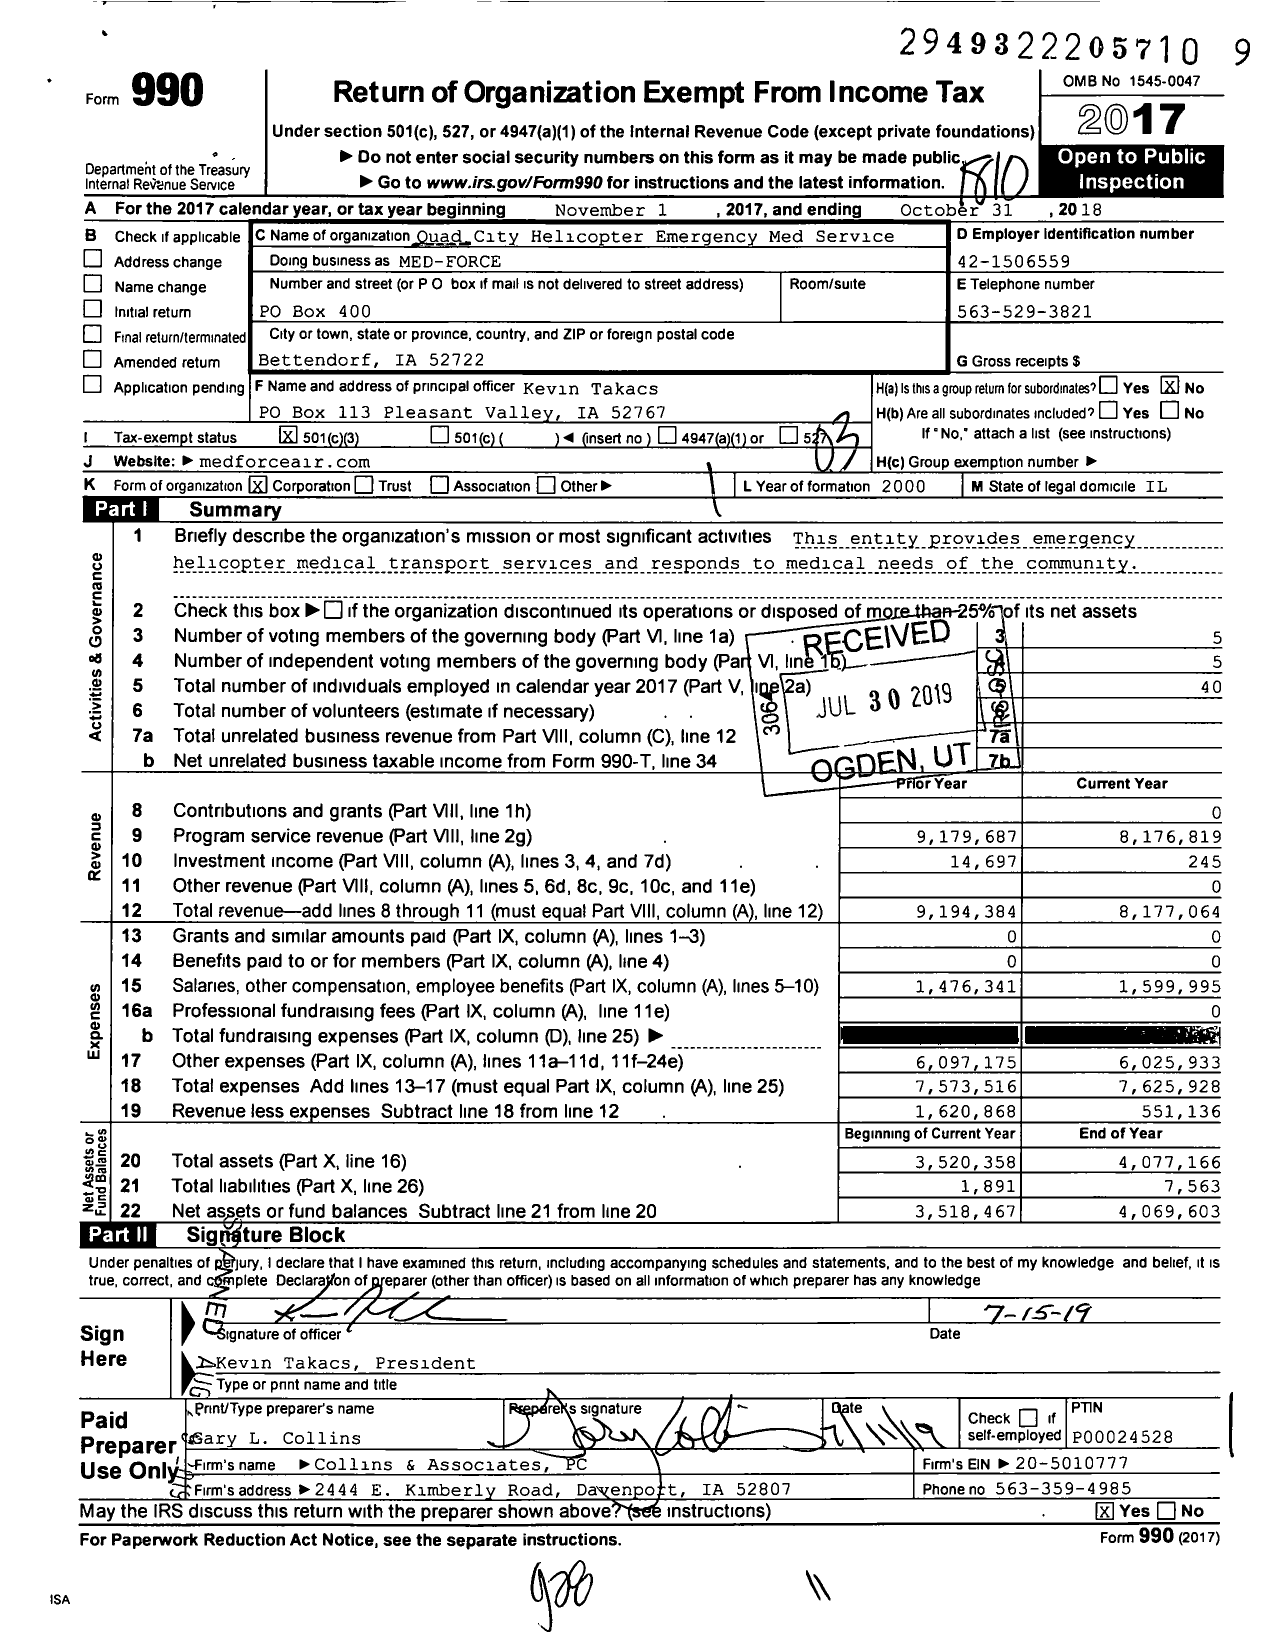 Image of first page of 2017 Form 990 for Quad City Helicopter Emergency Medical Service